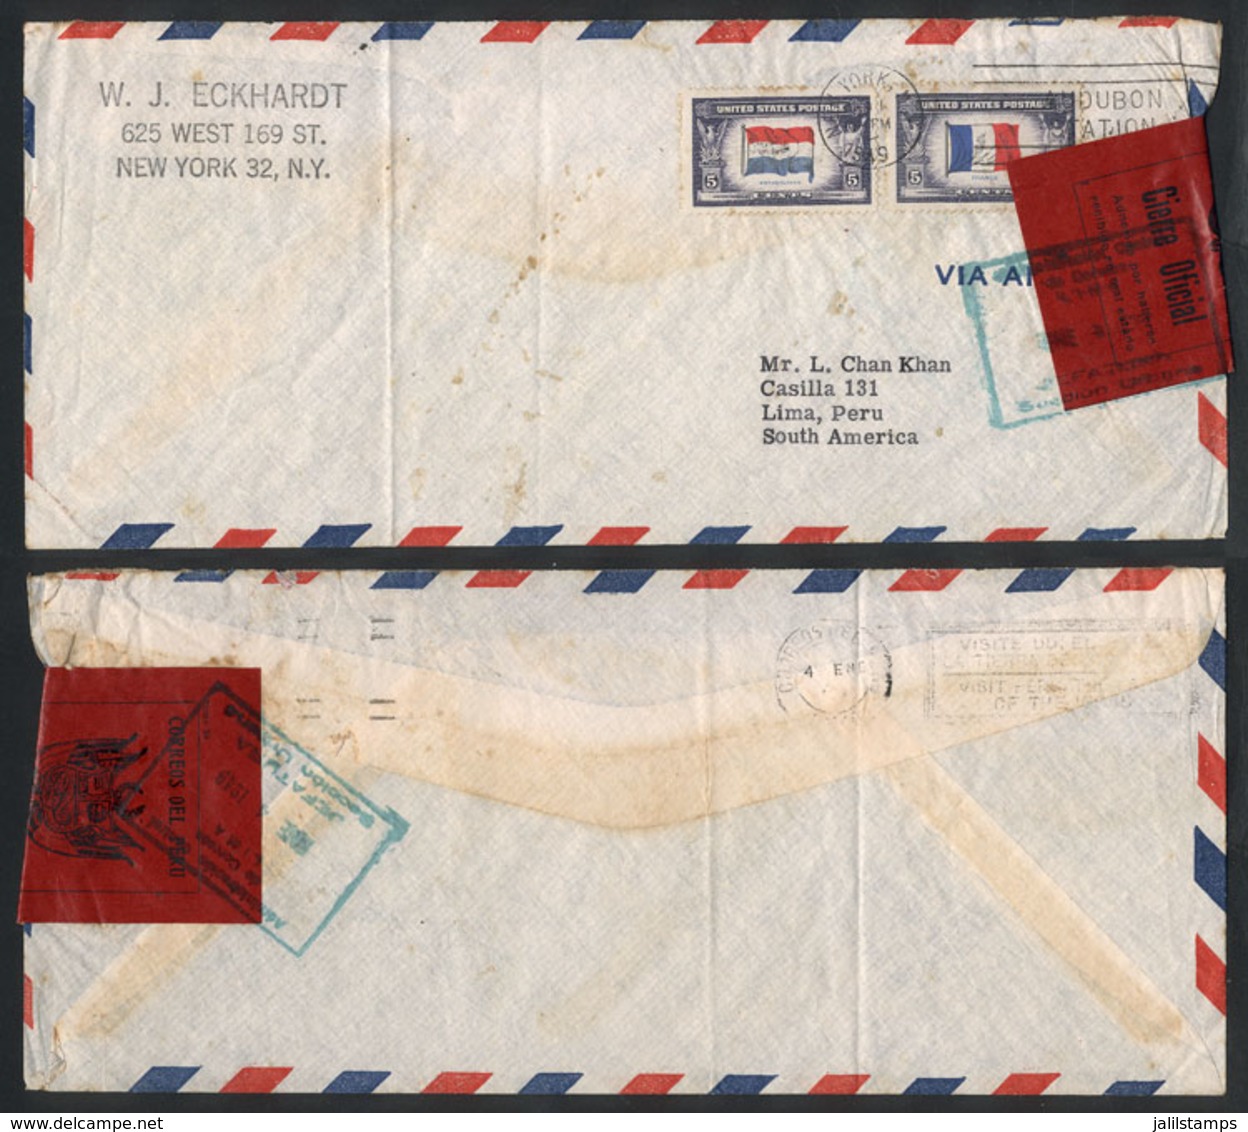 1687 PERU: Airmail Cover Sent From USA To Lima In 1949, At Right It Bears An Official Seal, Very Nice! - Perù